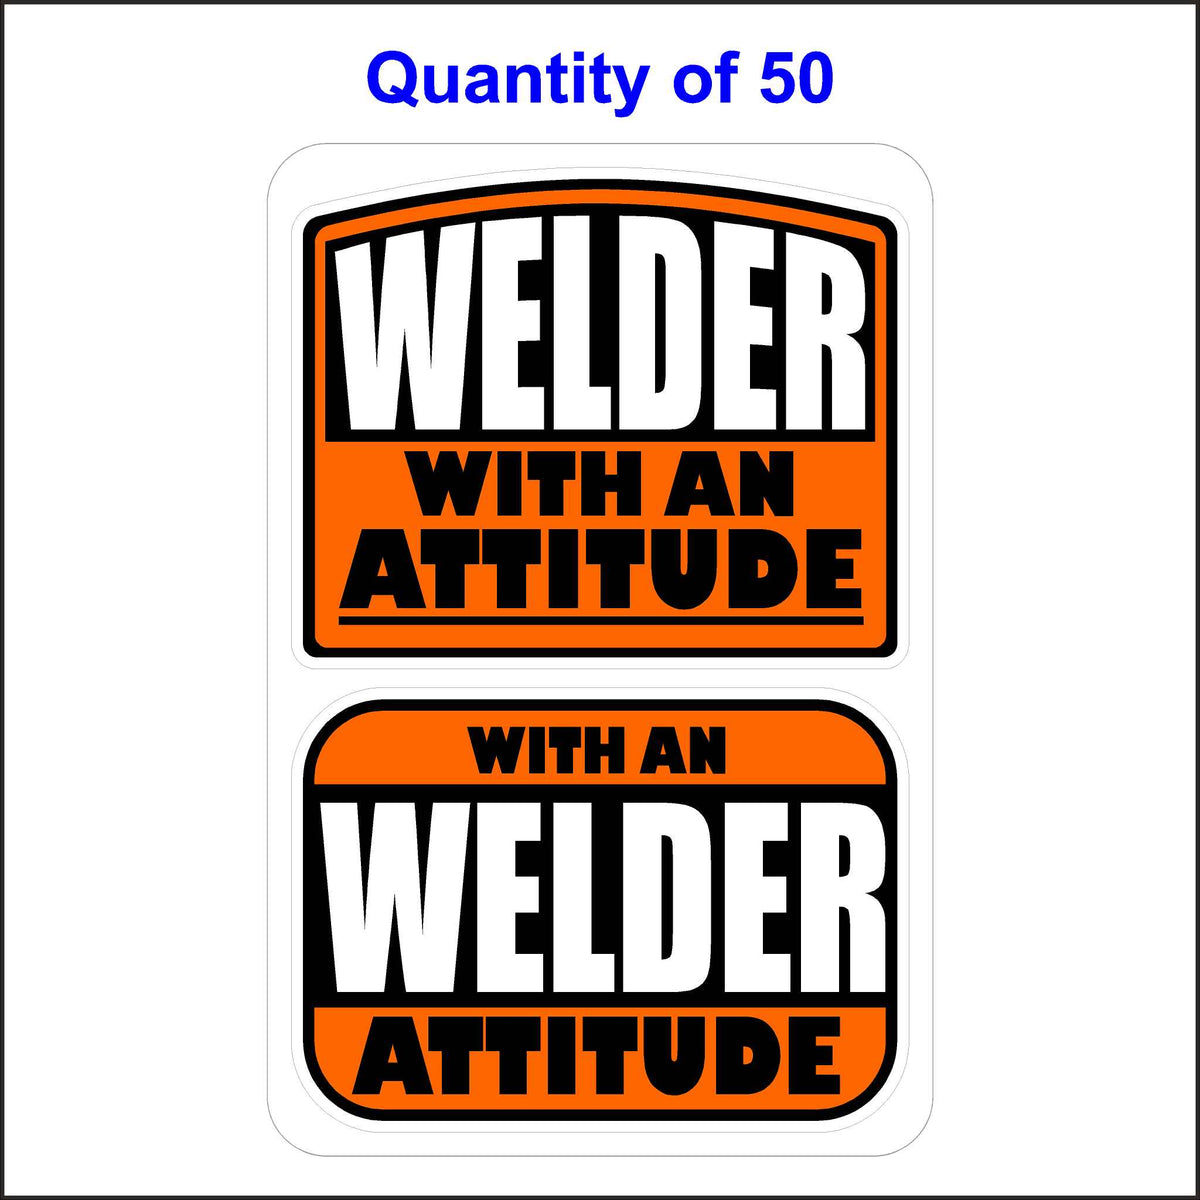 Welder With An Attitude Stickers 50 Quantity.